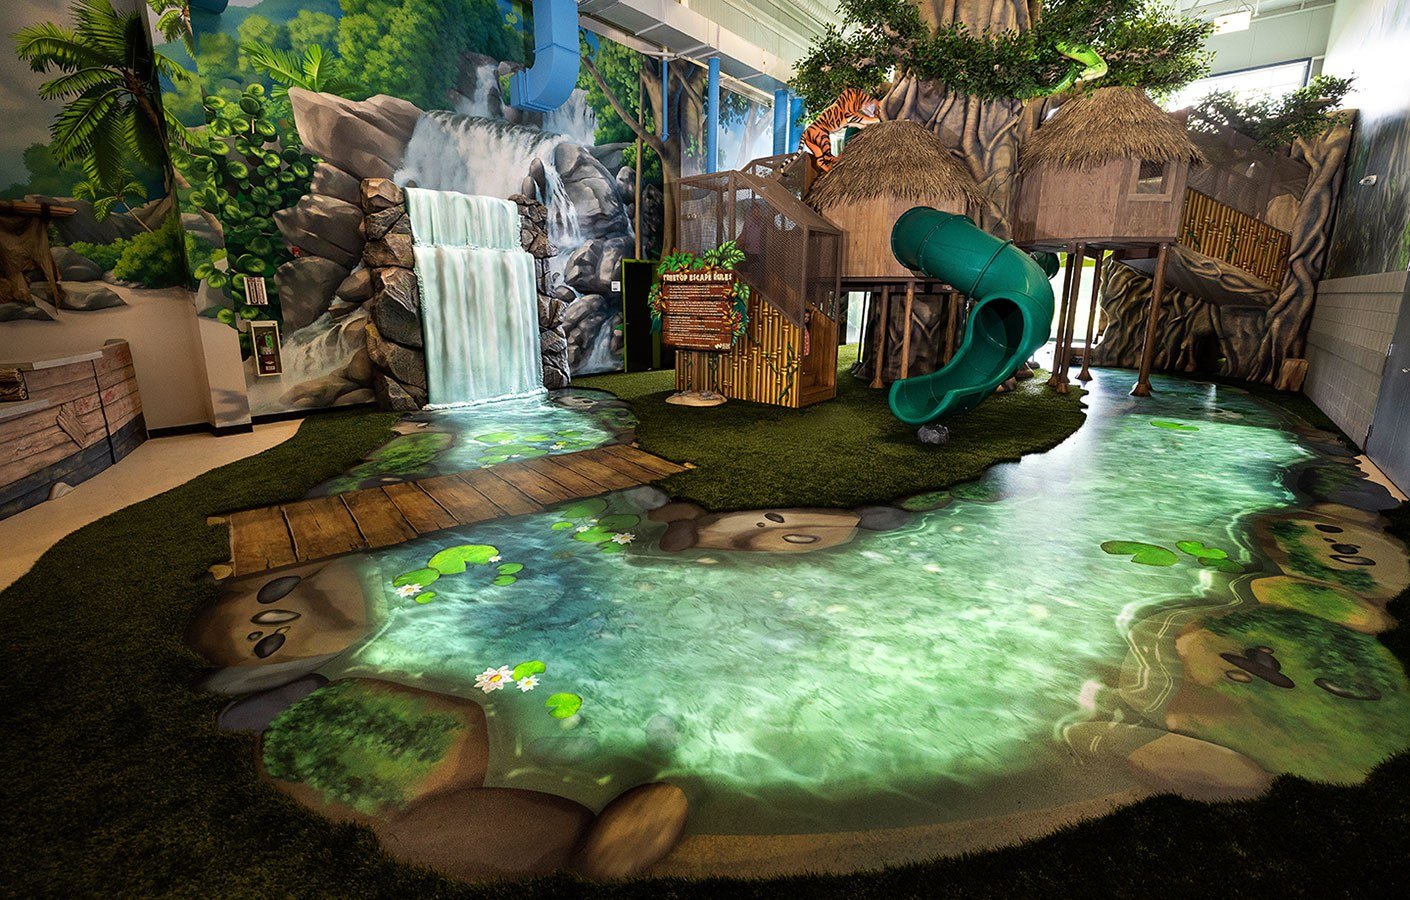 Giant Waterfall, River, Treehouse and Slides feature at West Chicago Parks District ARC Center